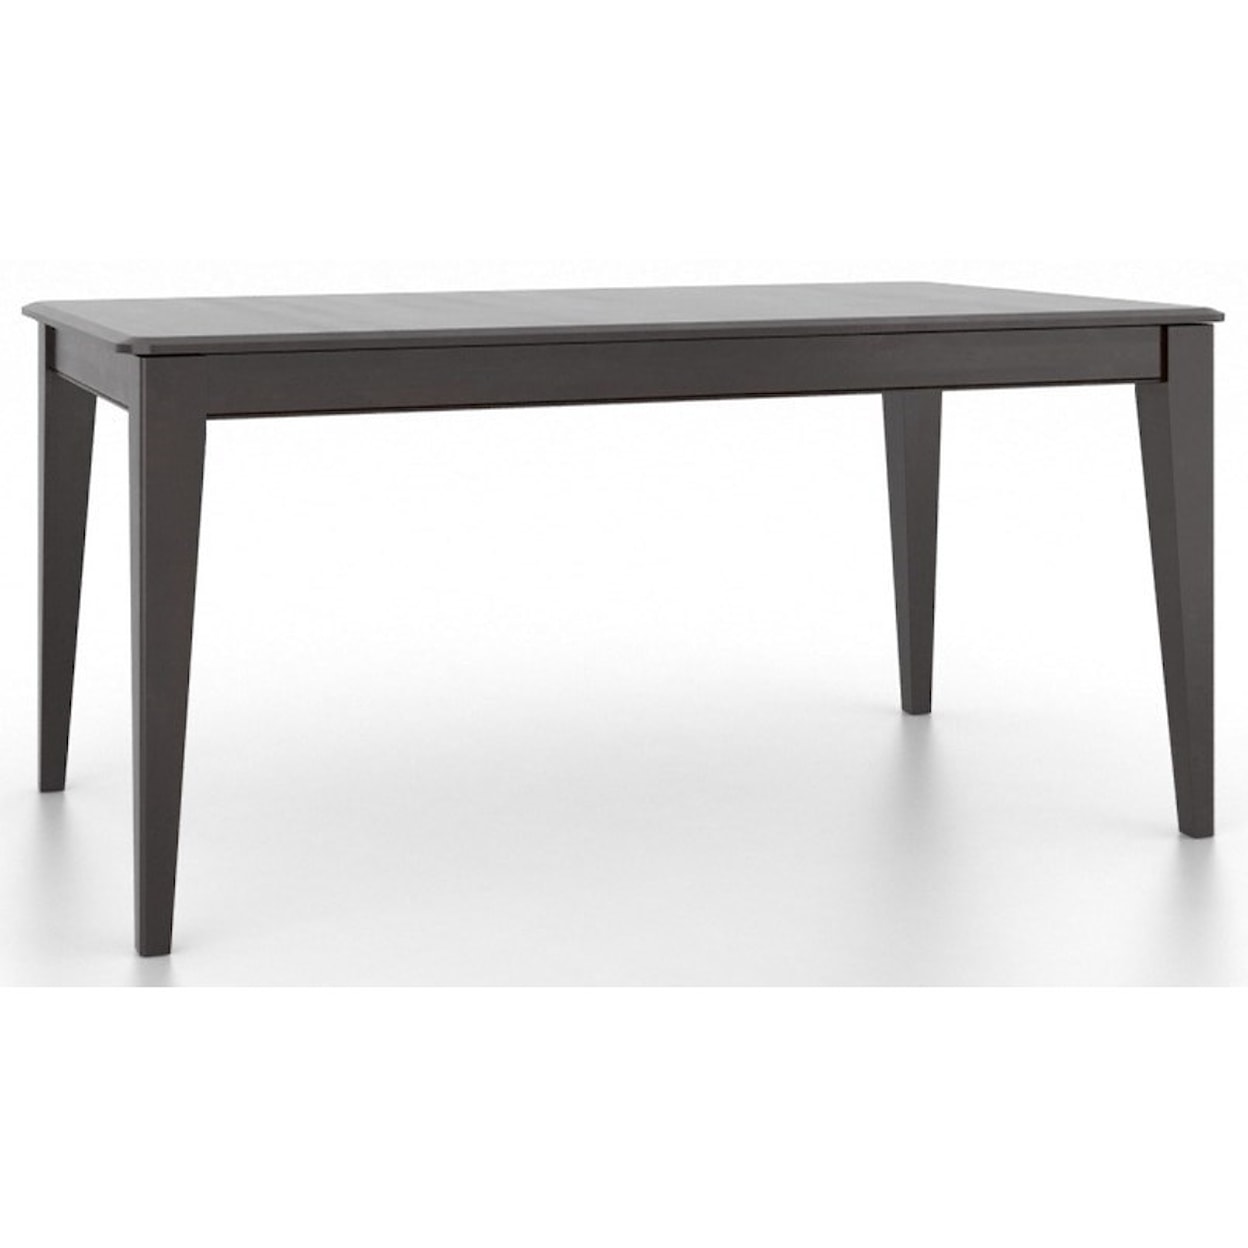 Canadel Gourmet Customizable Dining Table